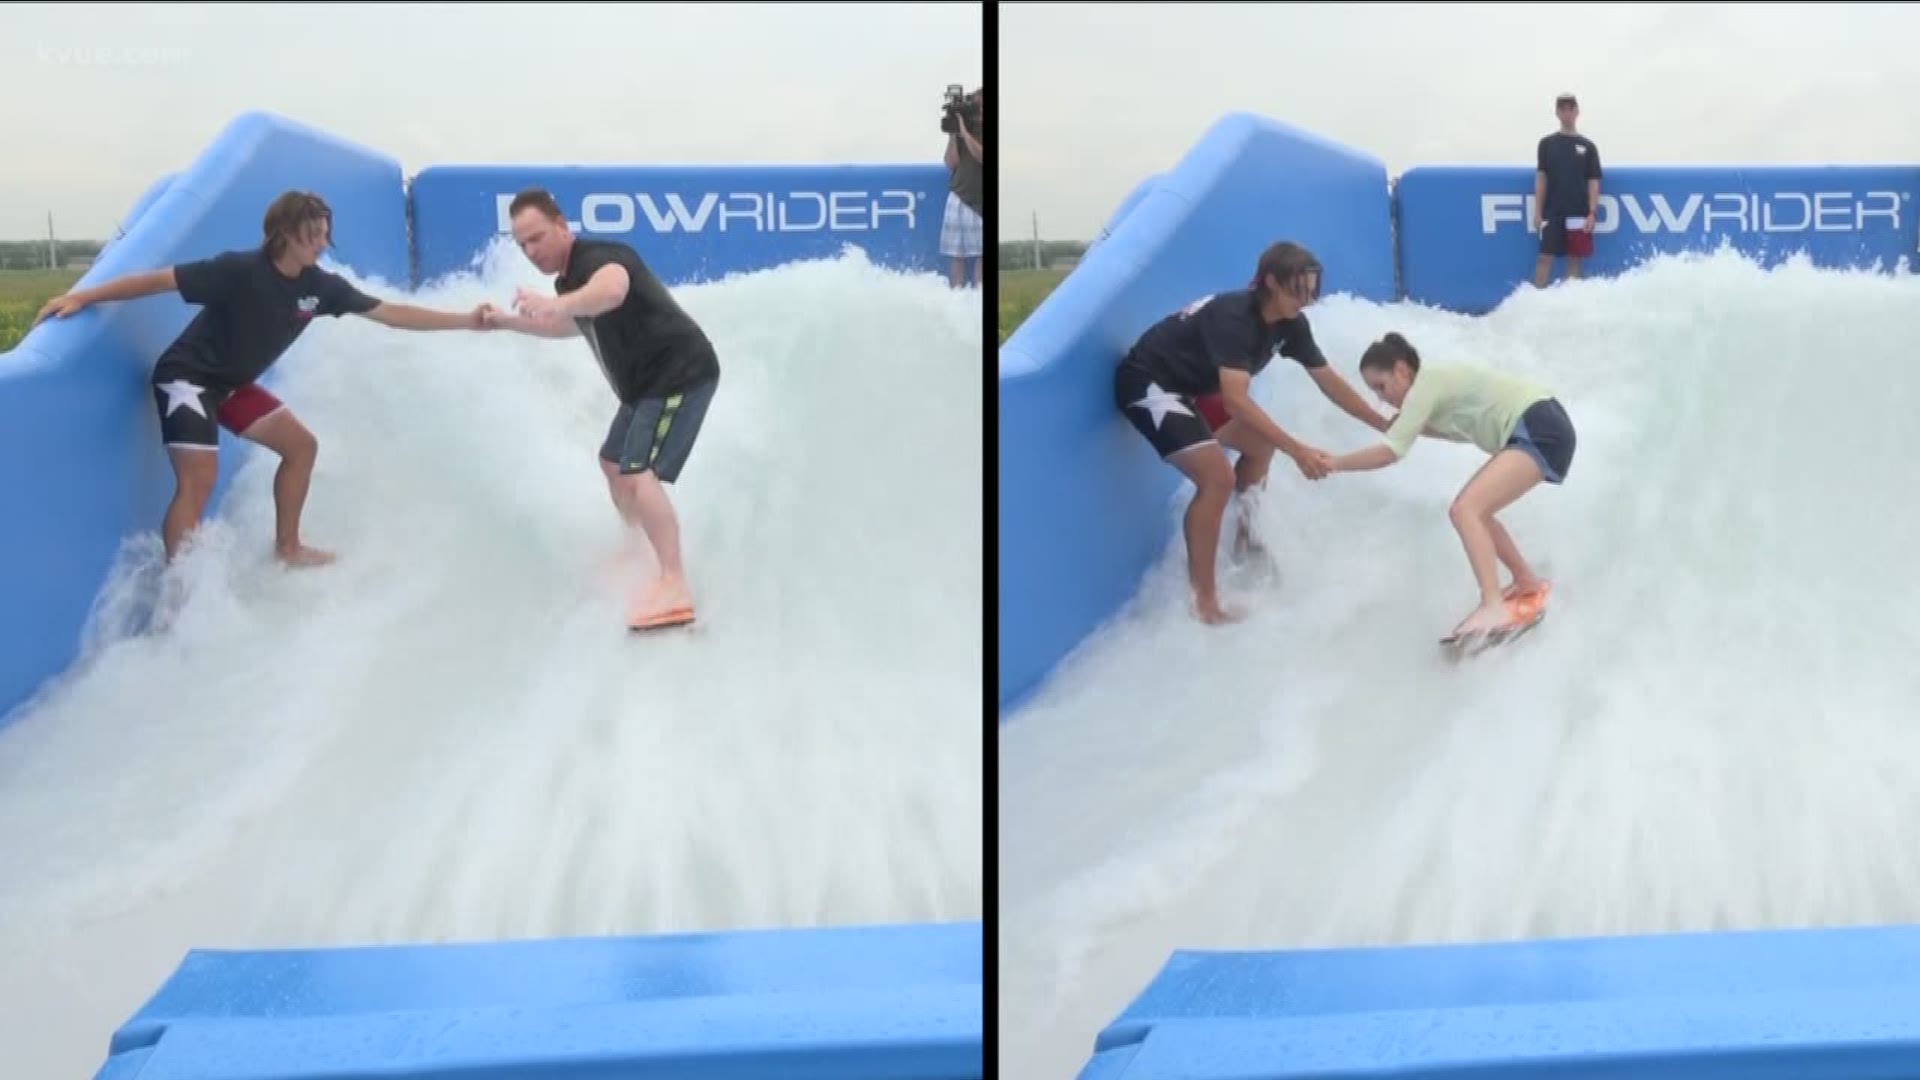 Typhoon Texas in Pflugerville has added a one-of-a-kind experience for Central Texas this summer and we experienced plenty of wipeouts on the new 'PFlowrider' surf simulator in this week's Daybreak Adventure.